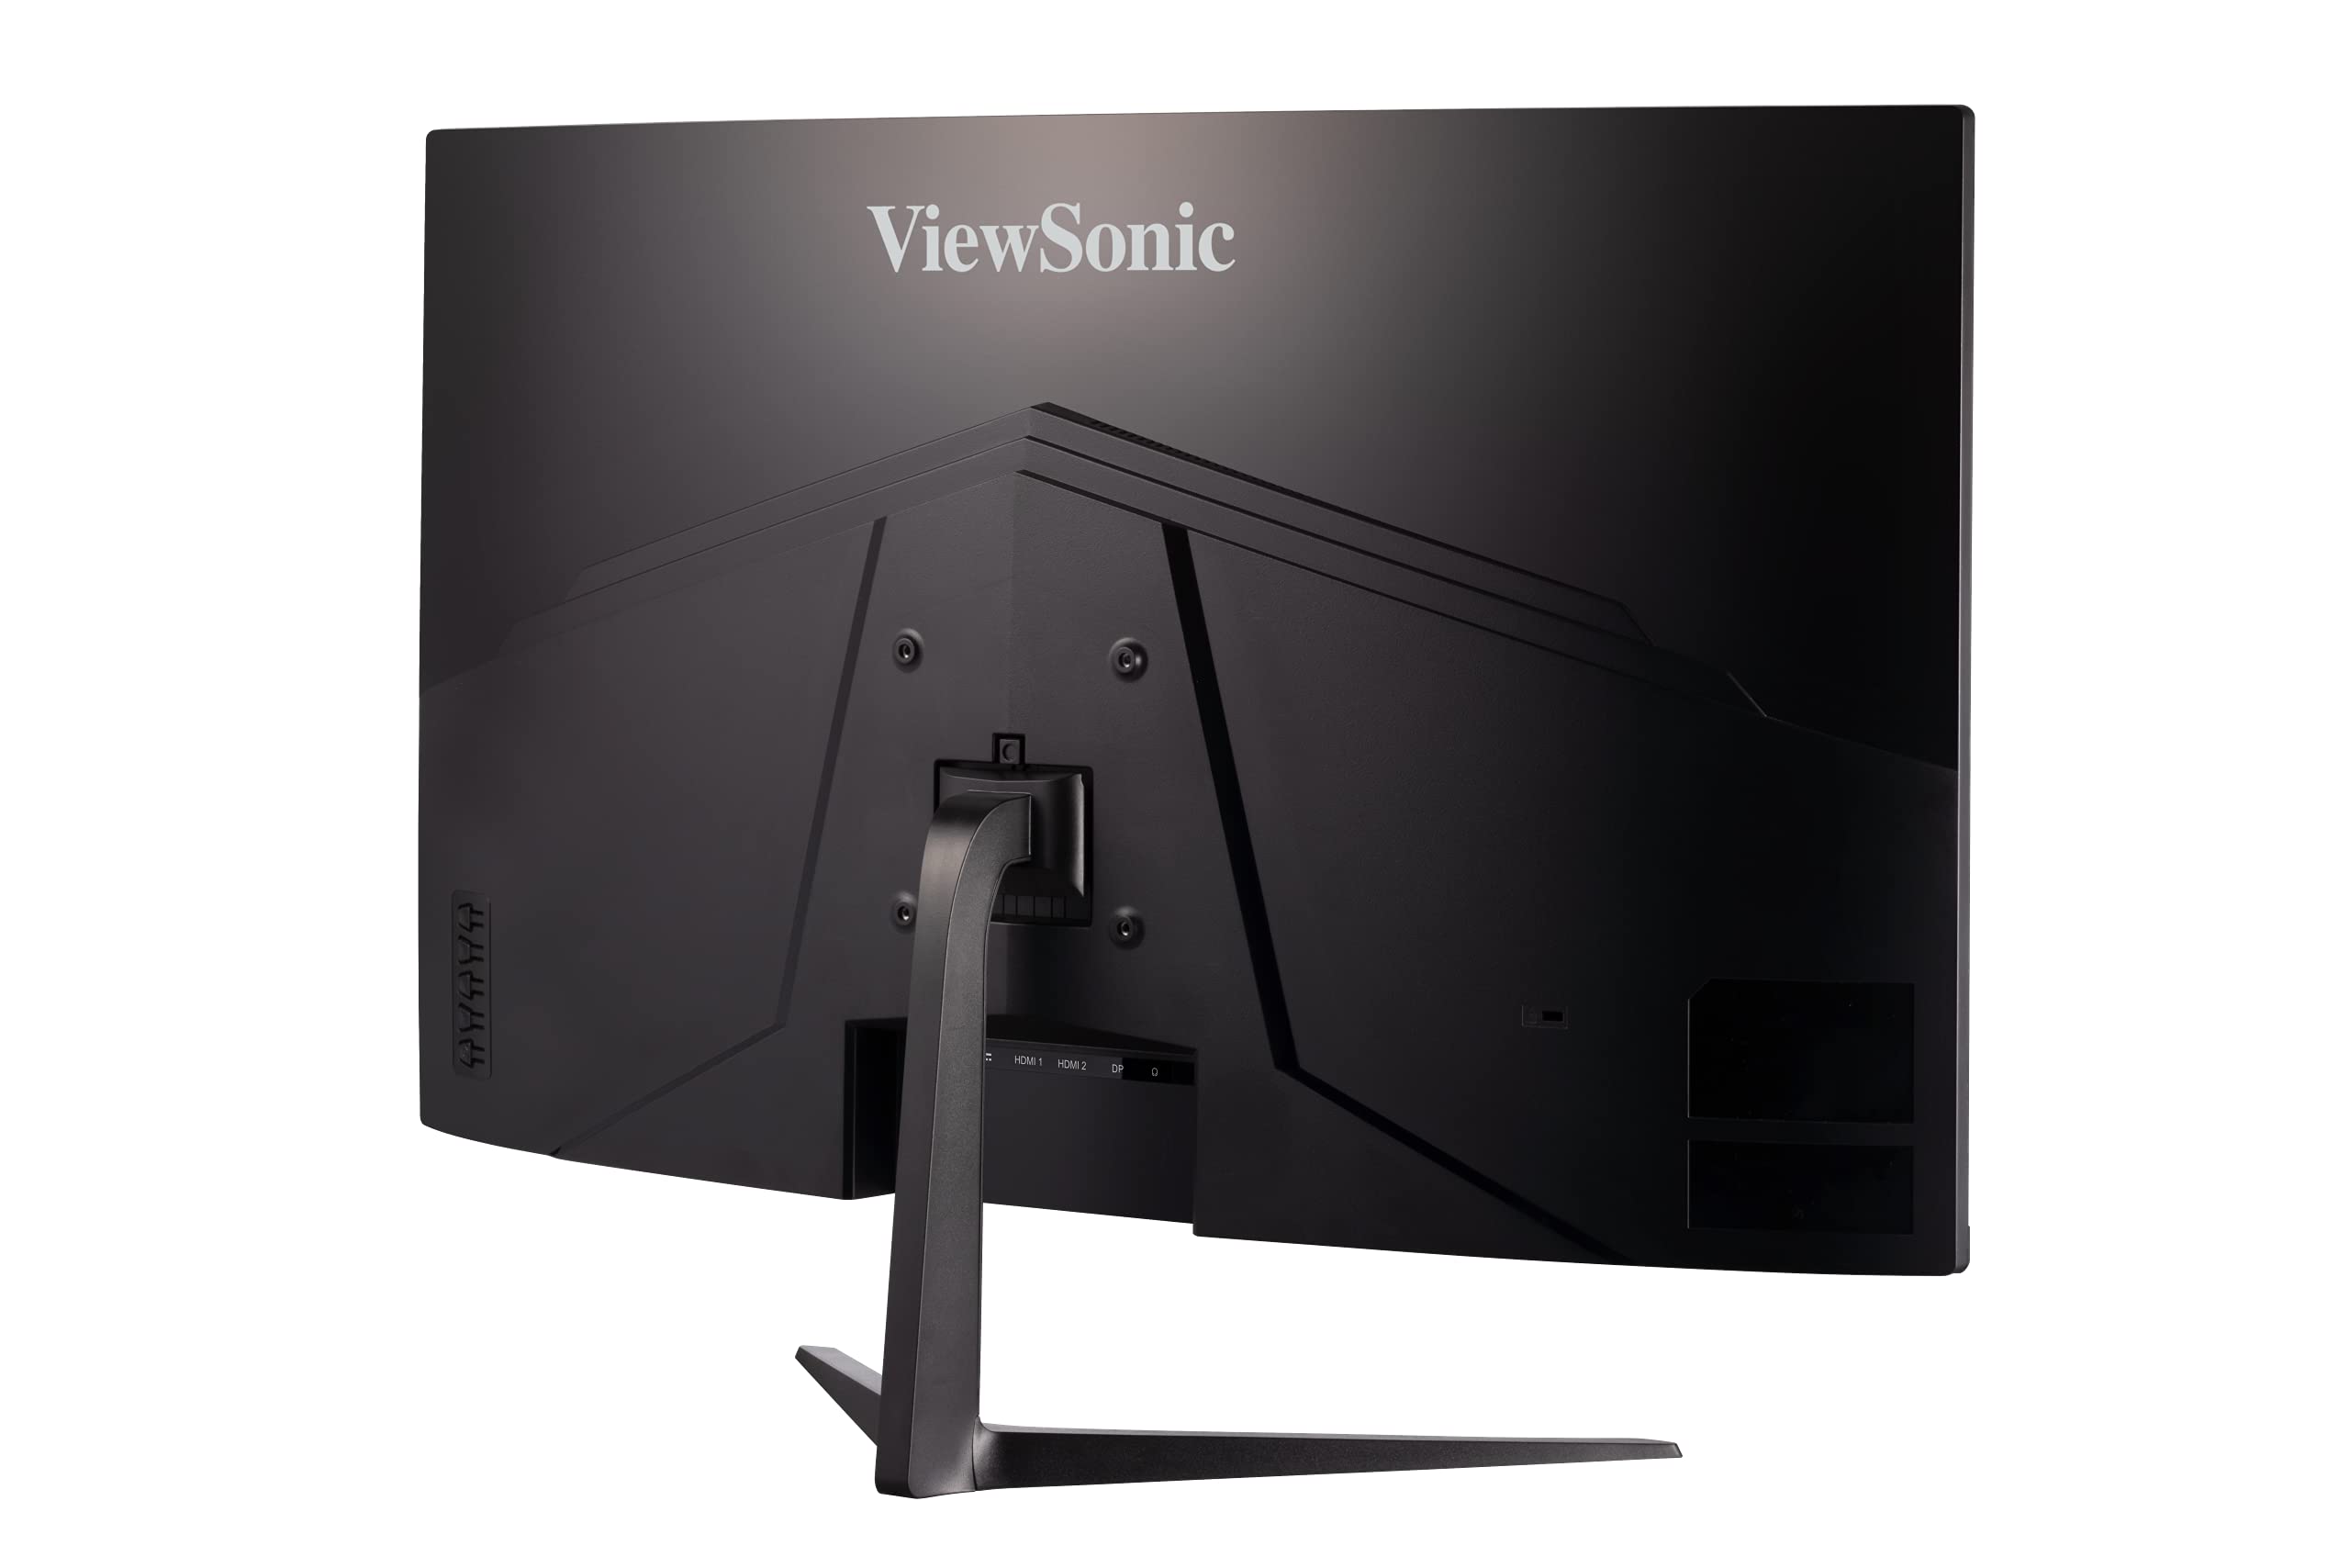 ViewSonic OMNI VX3218-PC-MHD 32 Inch Curved 1080p 1ms 165Hz Gaming Monitor with Adaptive Sync, Eye Care, HDMI and Display Port, Black